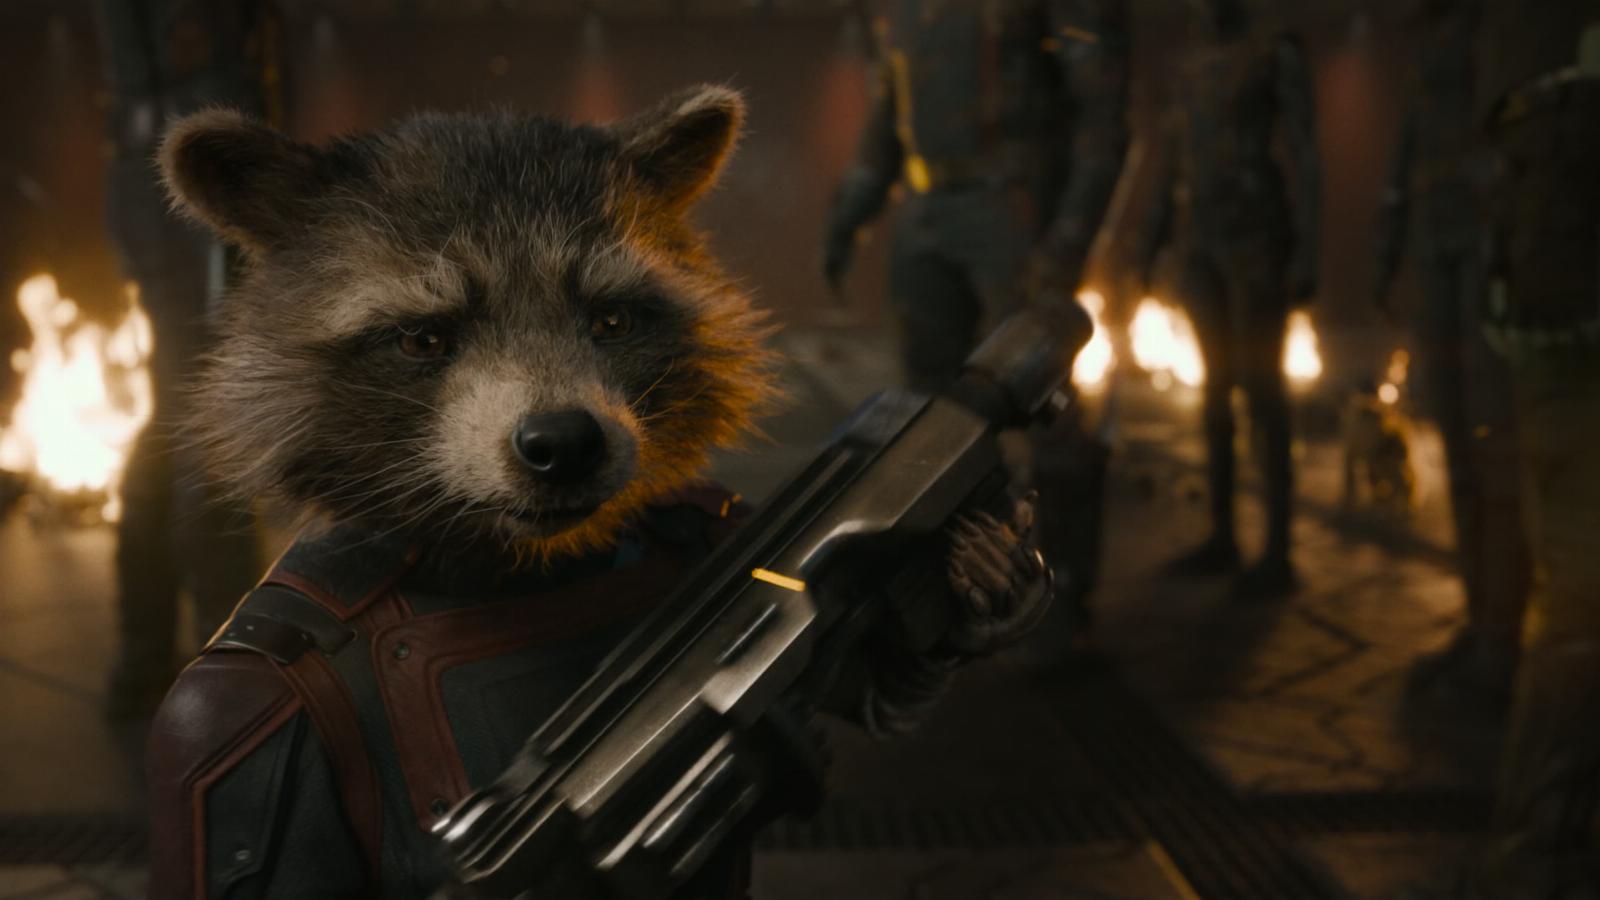 ‘Guardians of the Galaxy Vol. 3’ makes its debut on Disney+